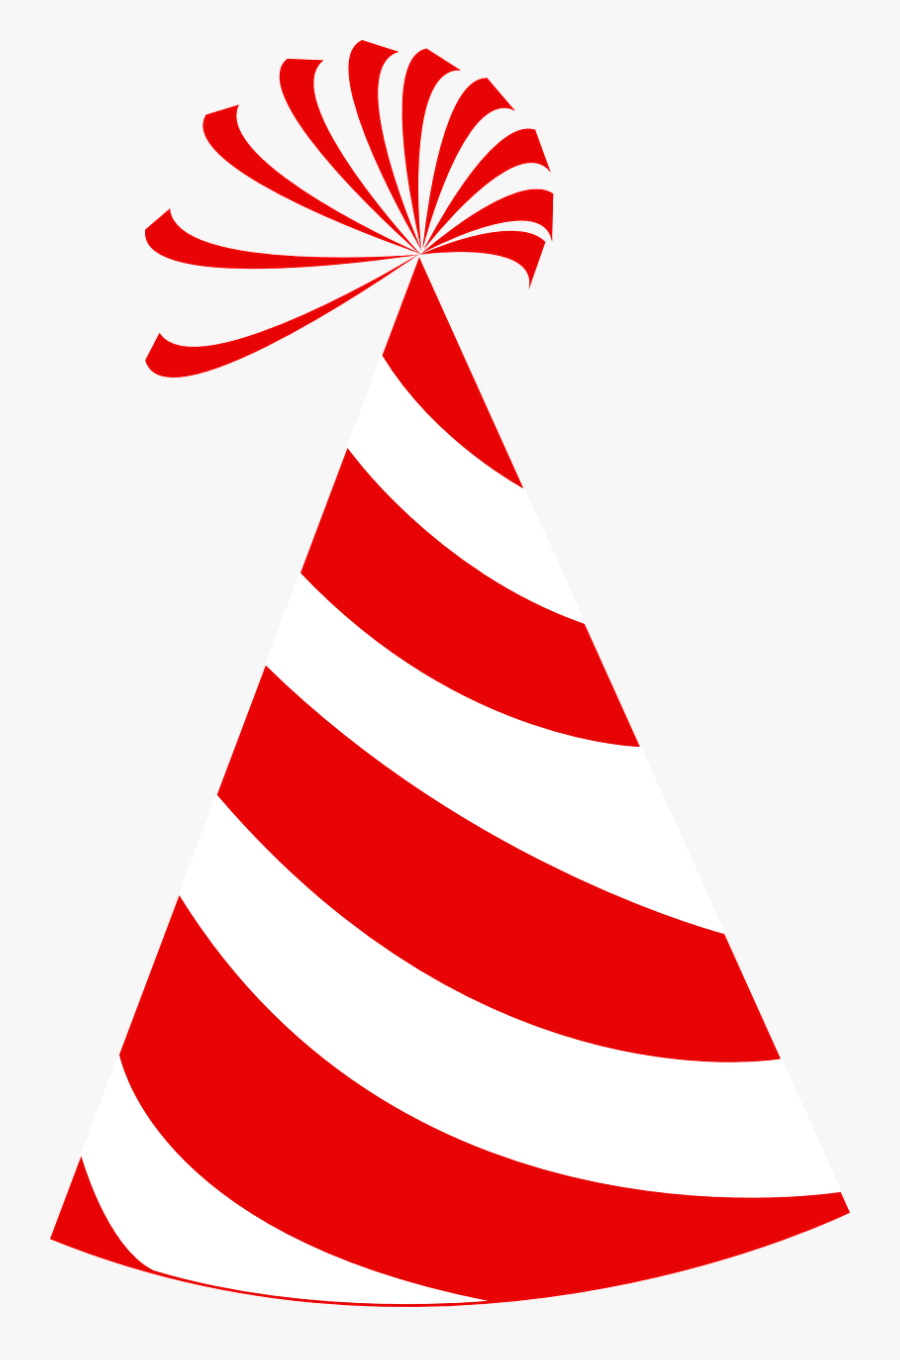 Hat Birthday Party Red Png Image - Transparent Background Birthday Hat Png, Transparent Clipart